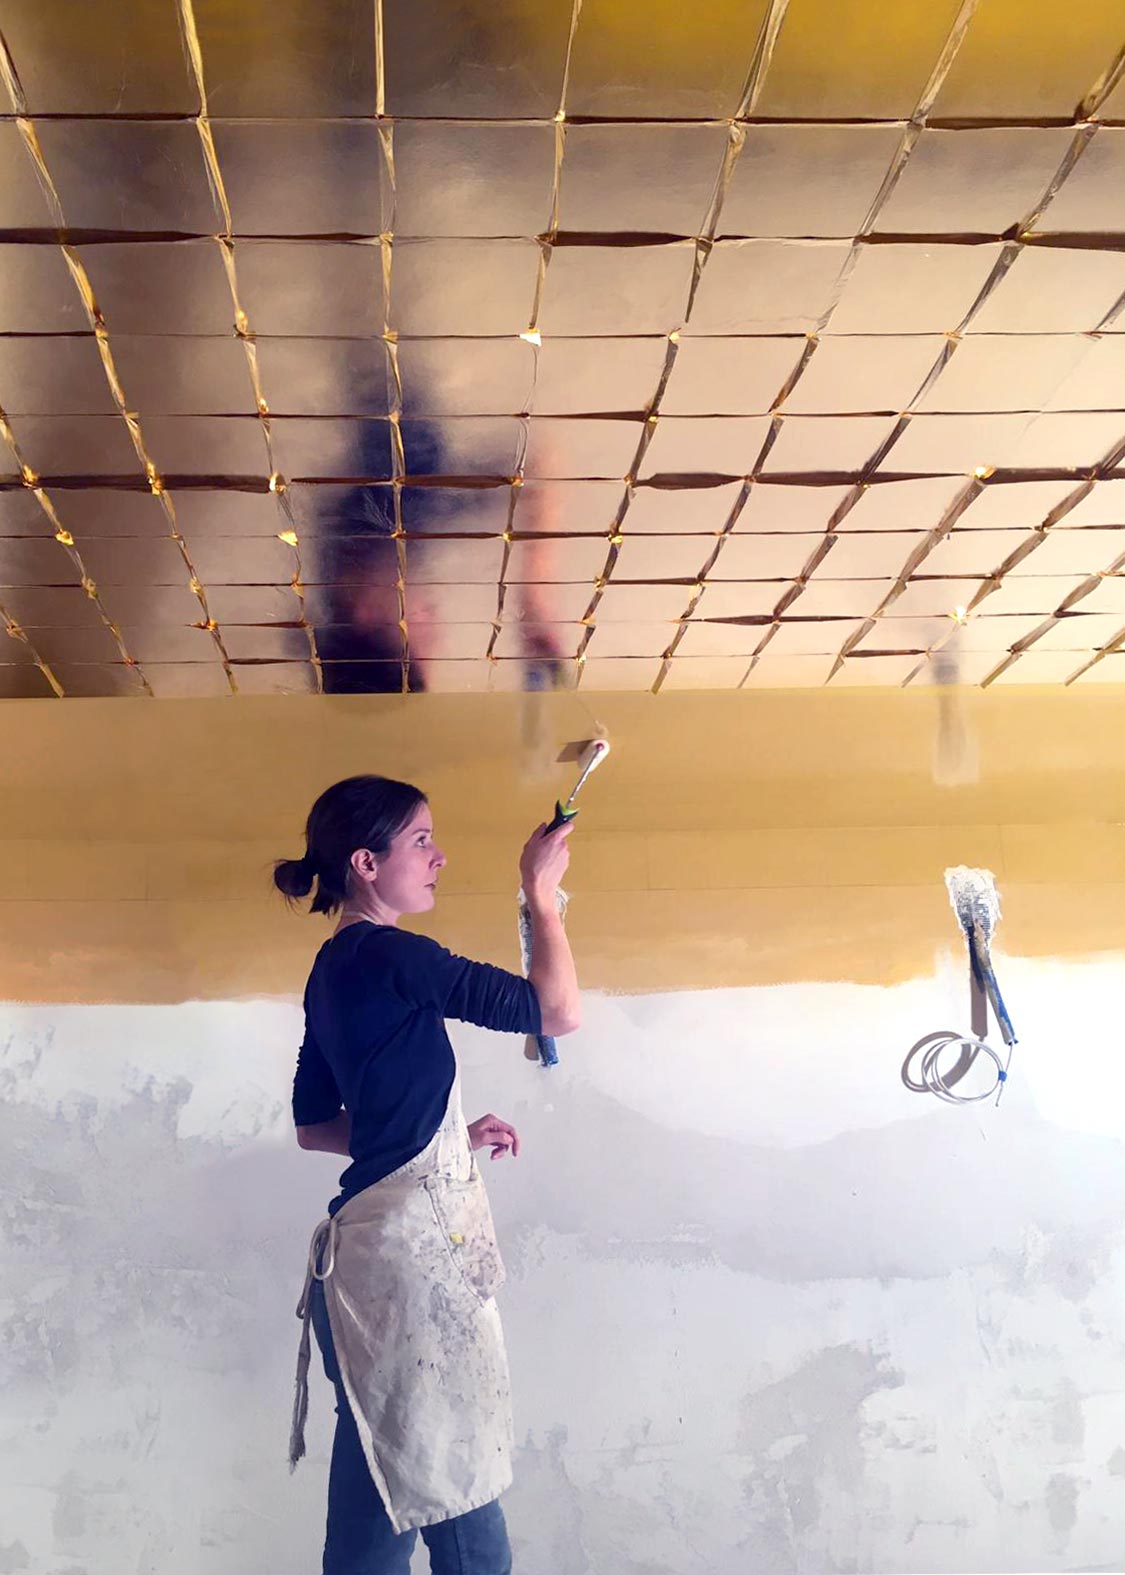 Preparing surface and applying size to ceiling before gilding | Photo: DKT Artworks